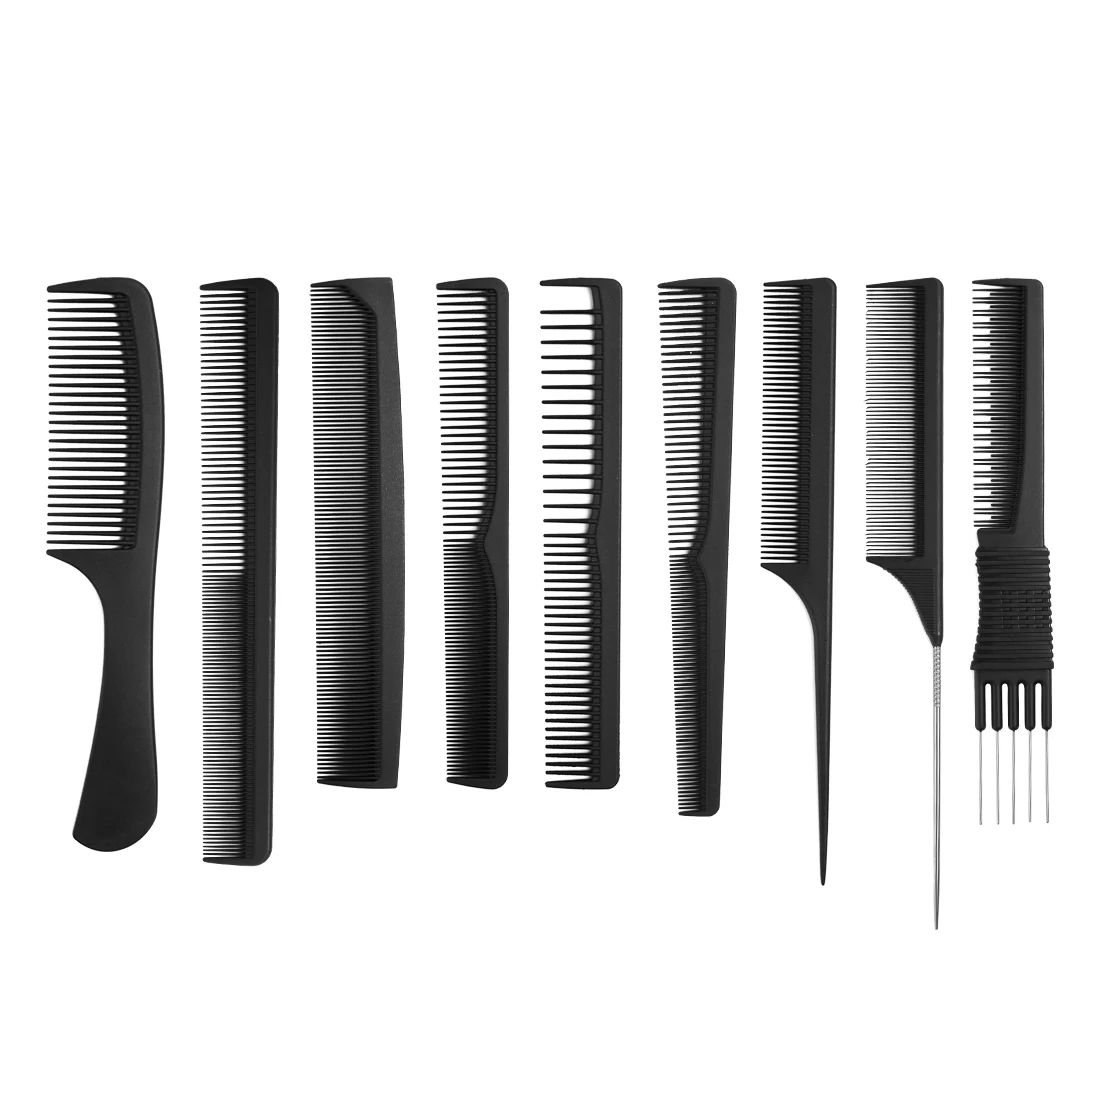 Hair Barber Styling Comb Set With 9 Pieces Combs Hair Cutting Comb Set Salon  Anti-static Stylists - Buy Hair Comb,Styling Comb,Plastic Comb Product on  